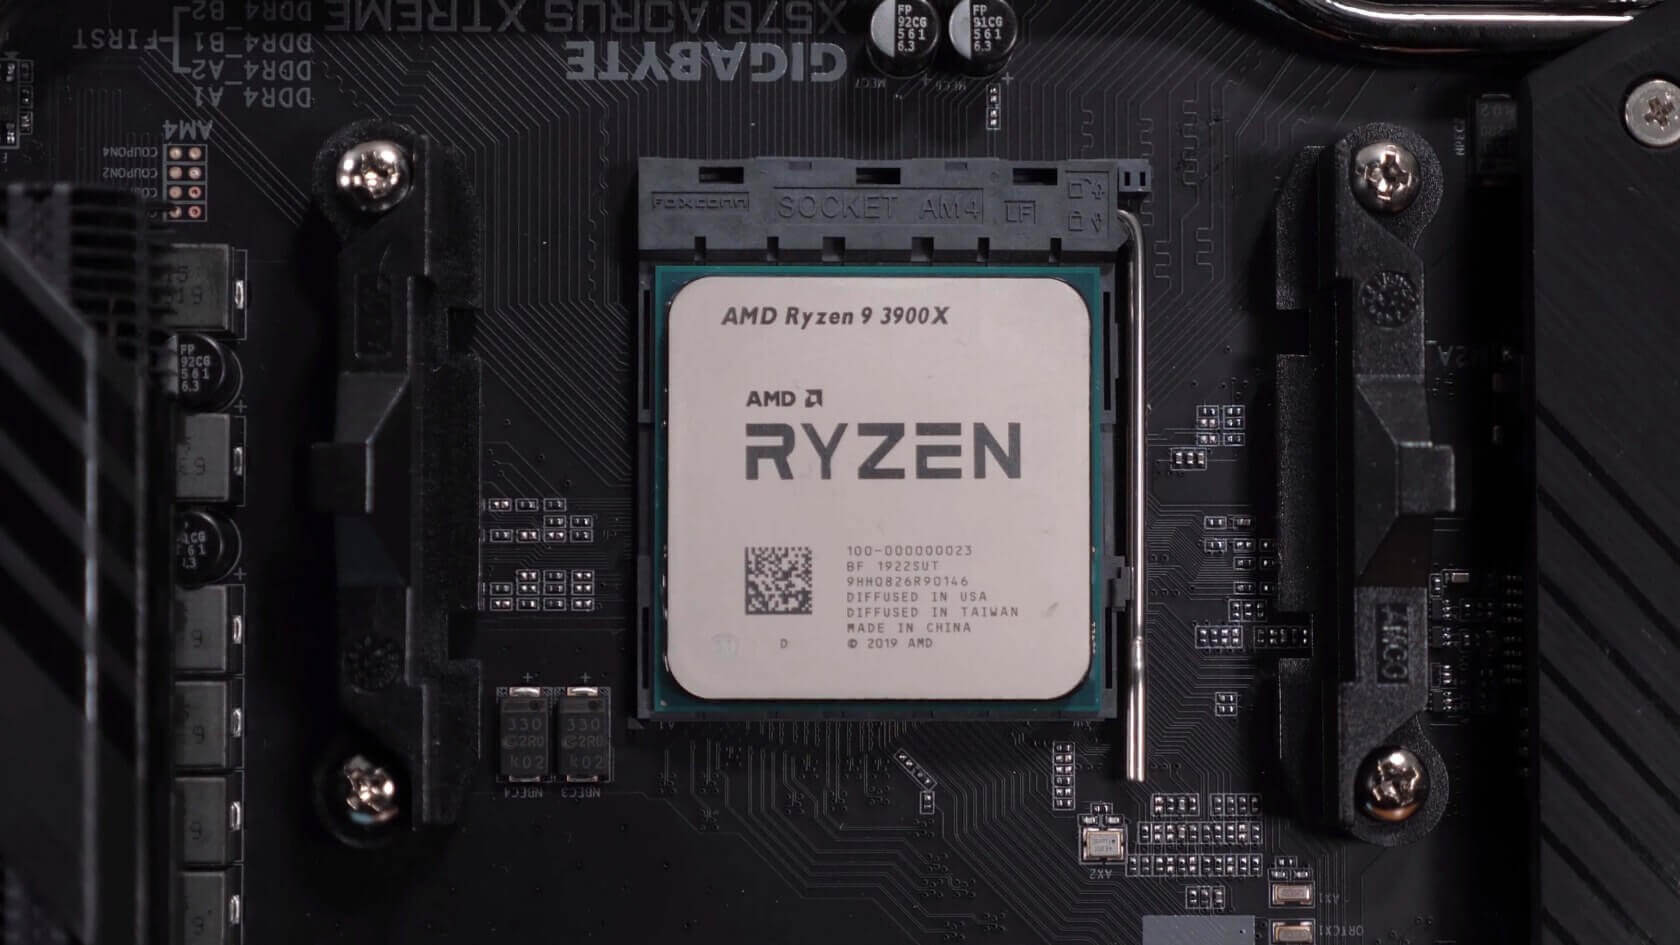 AMD's Ryzen 9 3900X is back in stock at select retailers